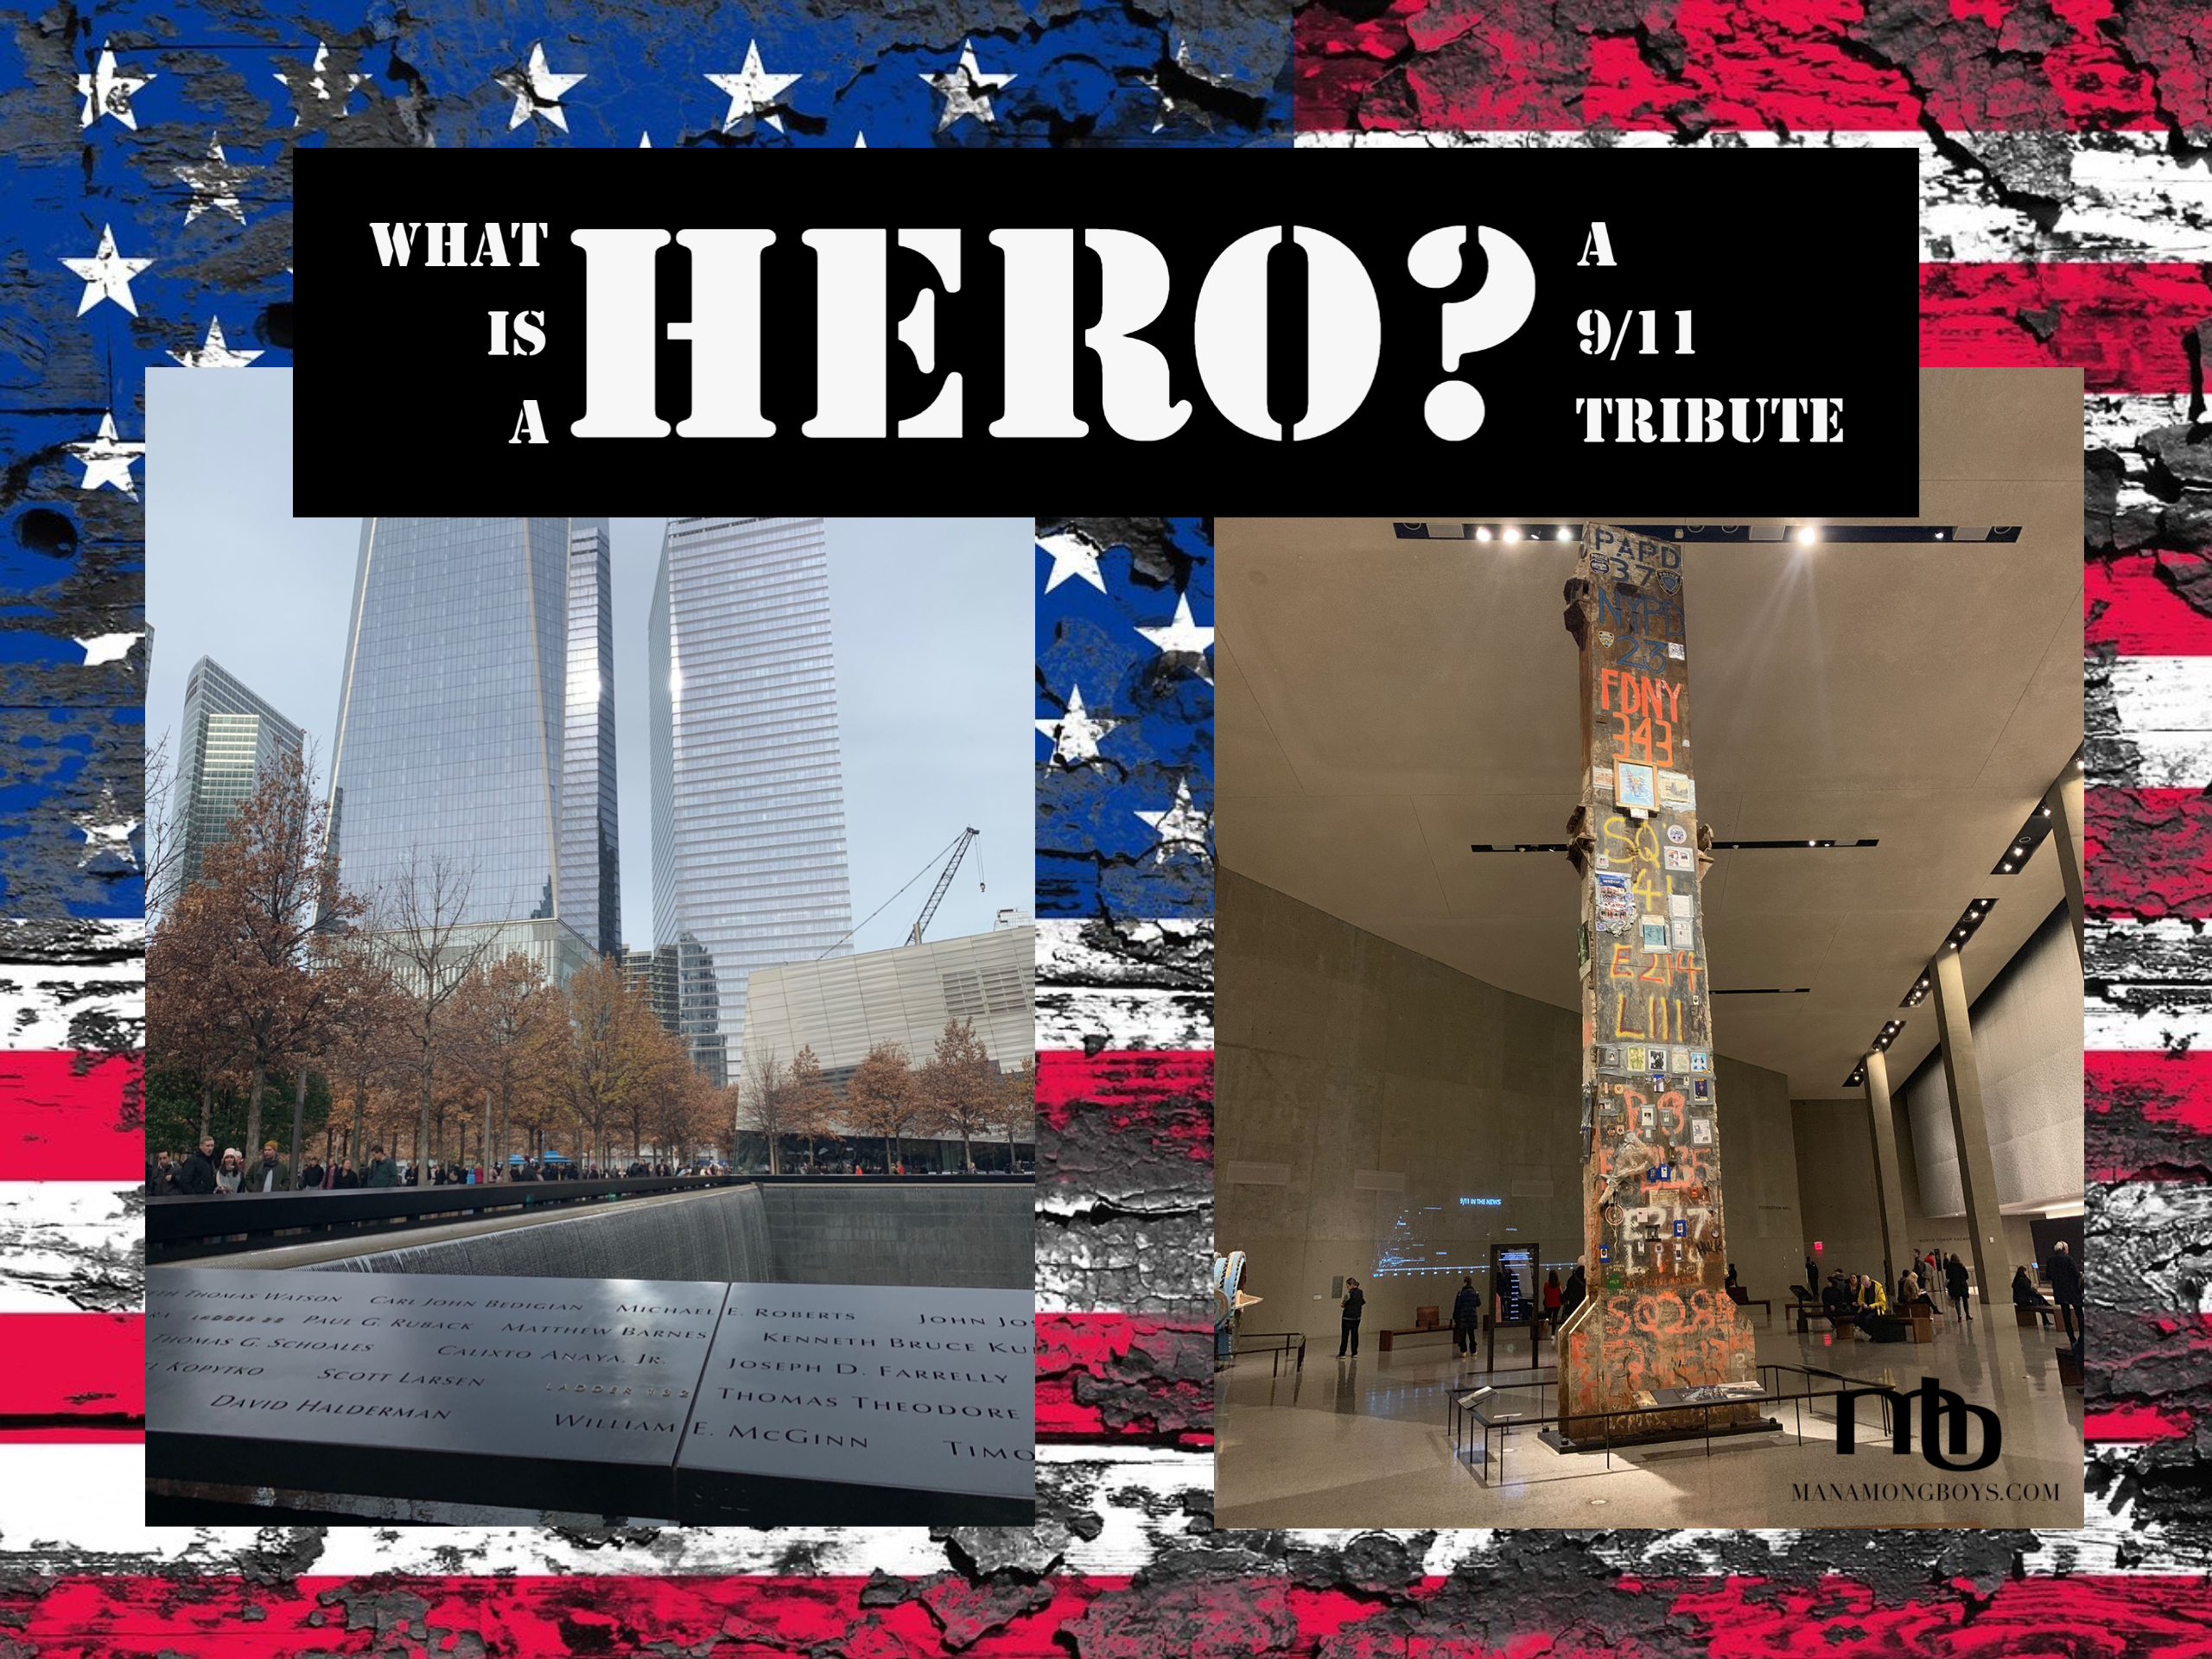 What Is A Hero?  A 9/11 Tribute